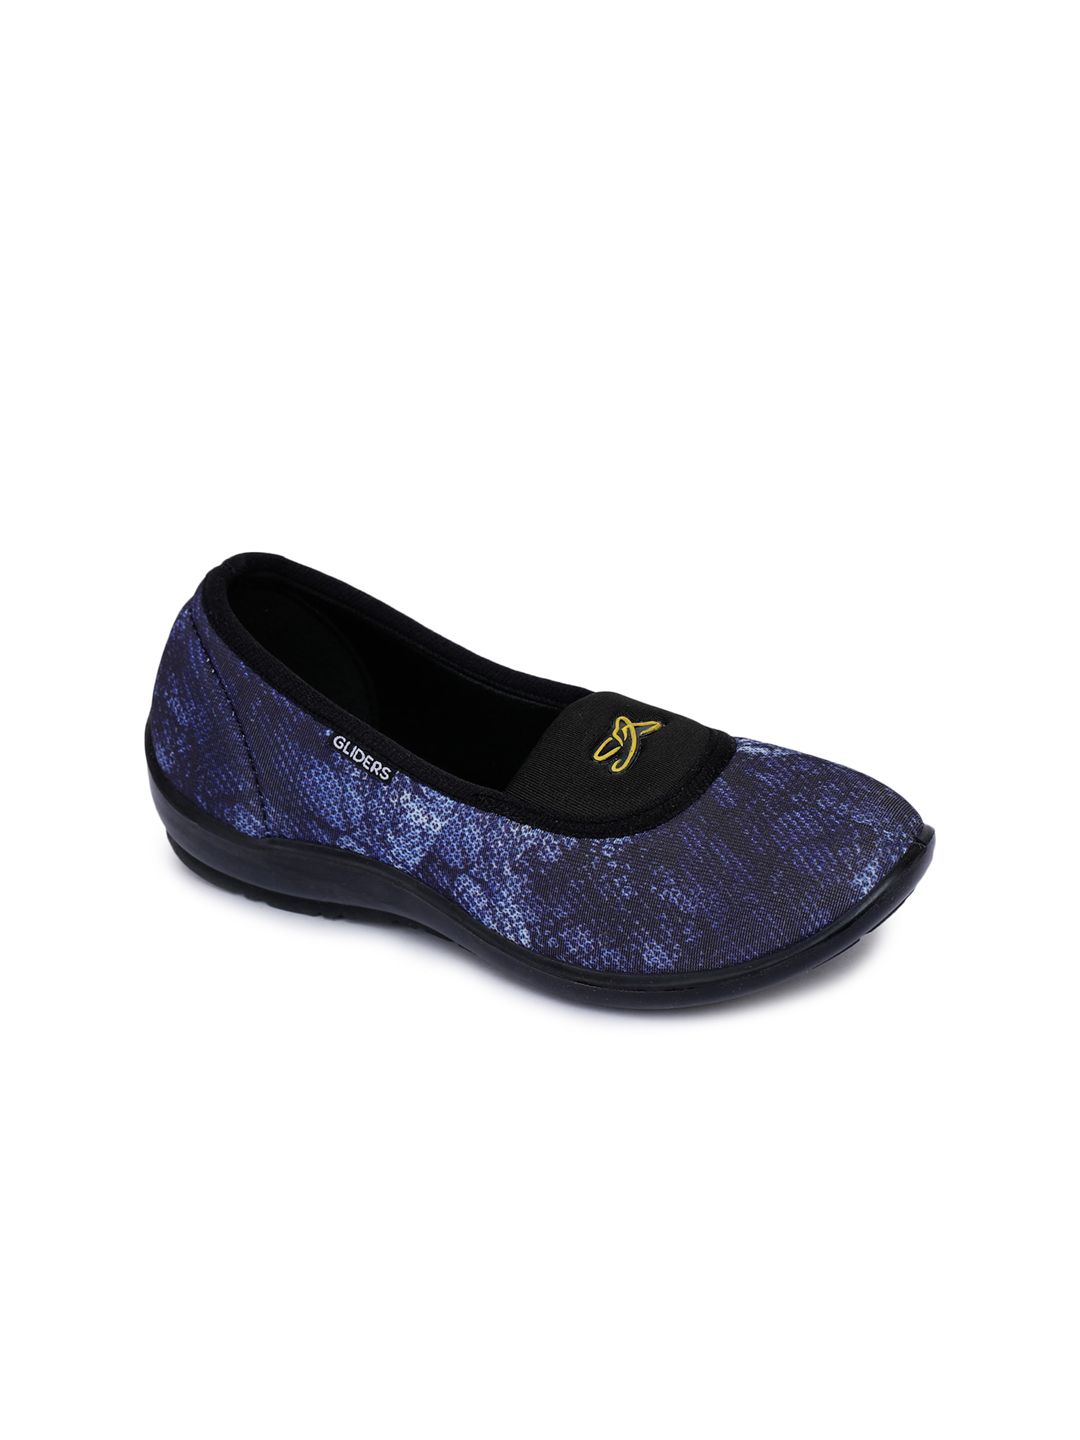 Liberty Women Blue Woven Design Loafers Price in India